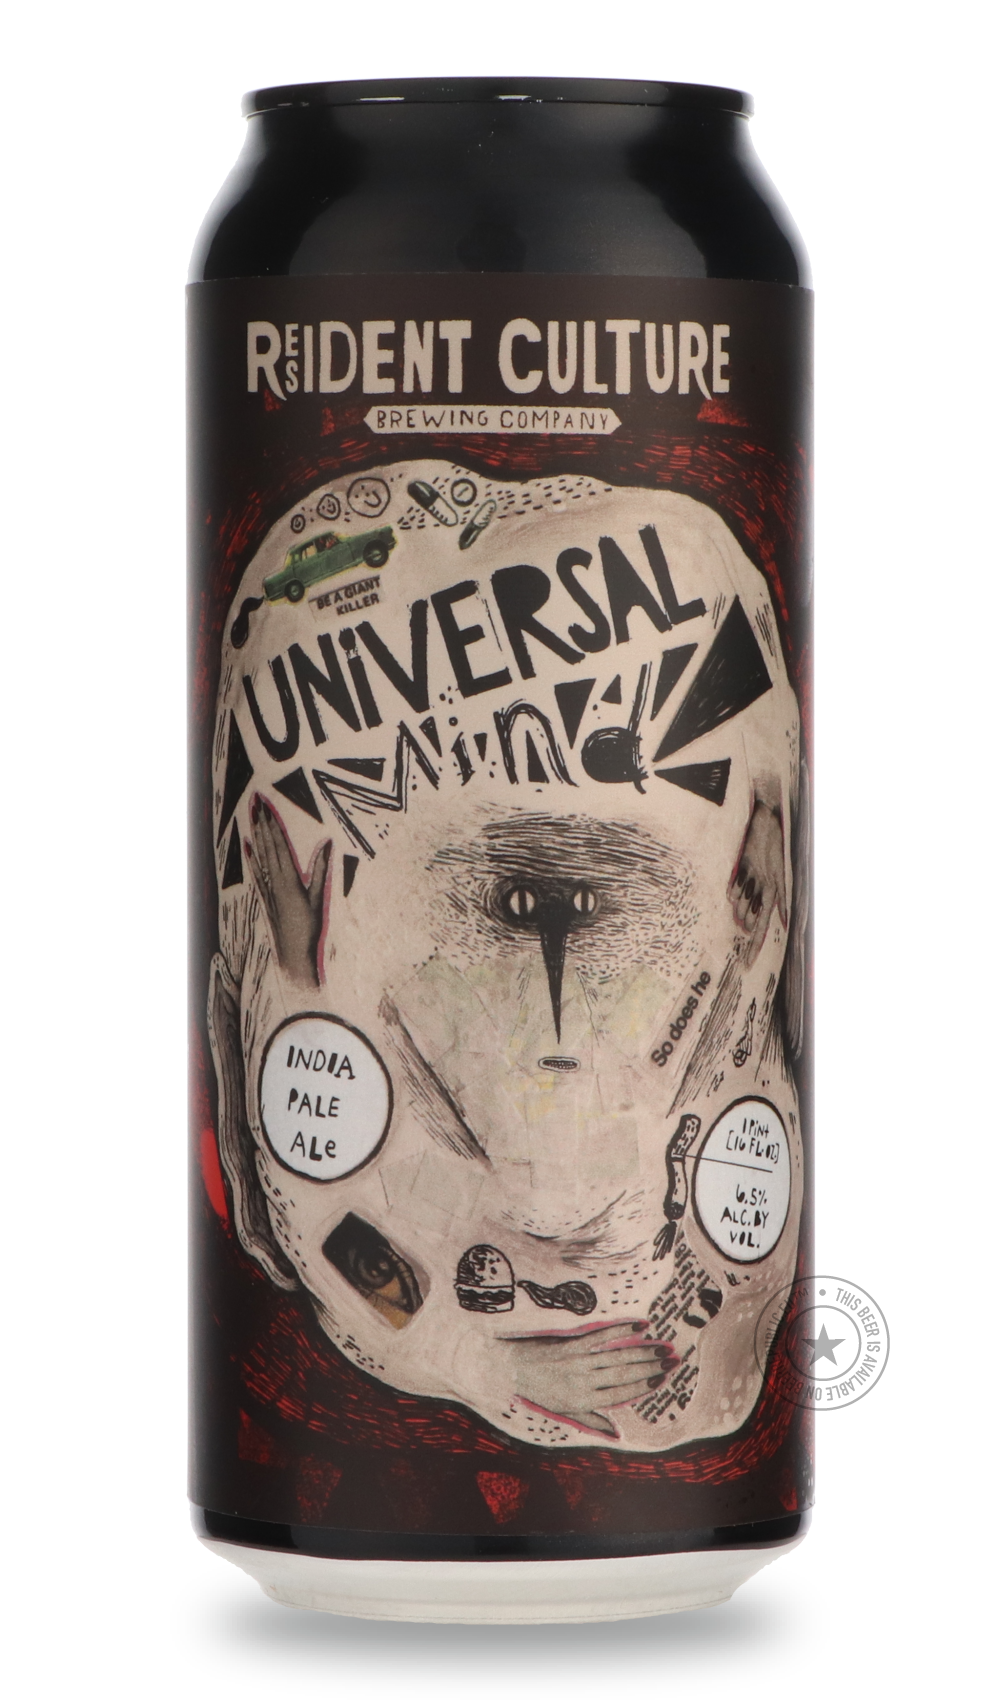 -Resident Culture- Universal Mind-IPA- Only @ Beer Republic - The best online beer store for American & Canadian craft beer - Buy beer online from the USA and Canada - Bier online kopen - Amerikaans bier kopen - Craft beer store - Craft beer kopen - Amerikanisch bier kaufen - Bier online kaufen - Acheter biere online - IPA - Stout - Porter - New England IPA - Hazy IPA - Imperial Stout - Barrel Aged - Barrel Aged Imperial Stout - Brown - Dark beer - Blond - Blonde - Pilsner - Lager - Wheat - Weizen - Amber -